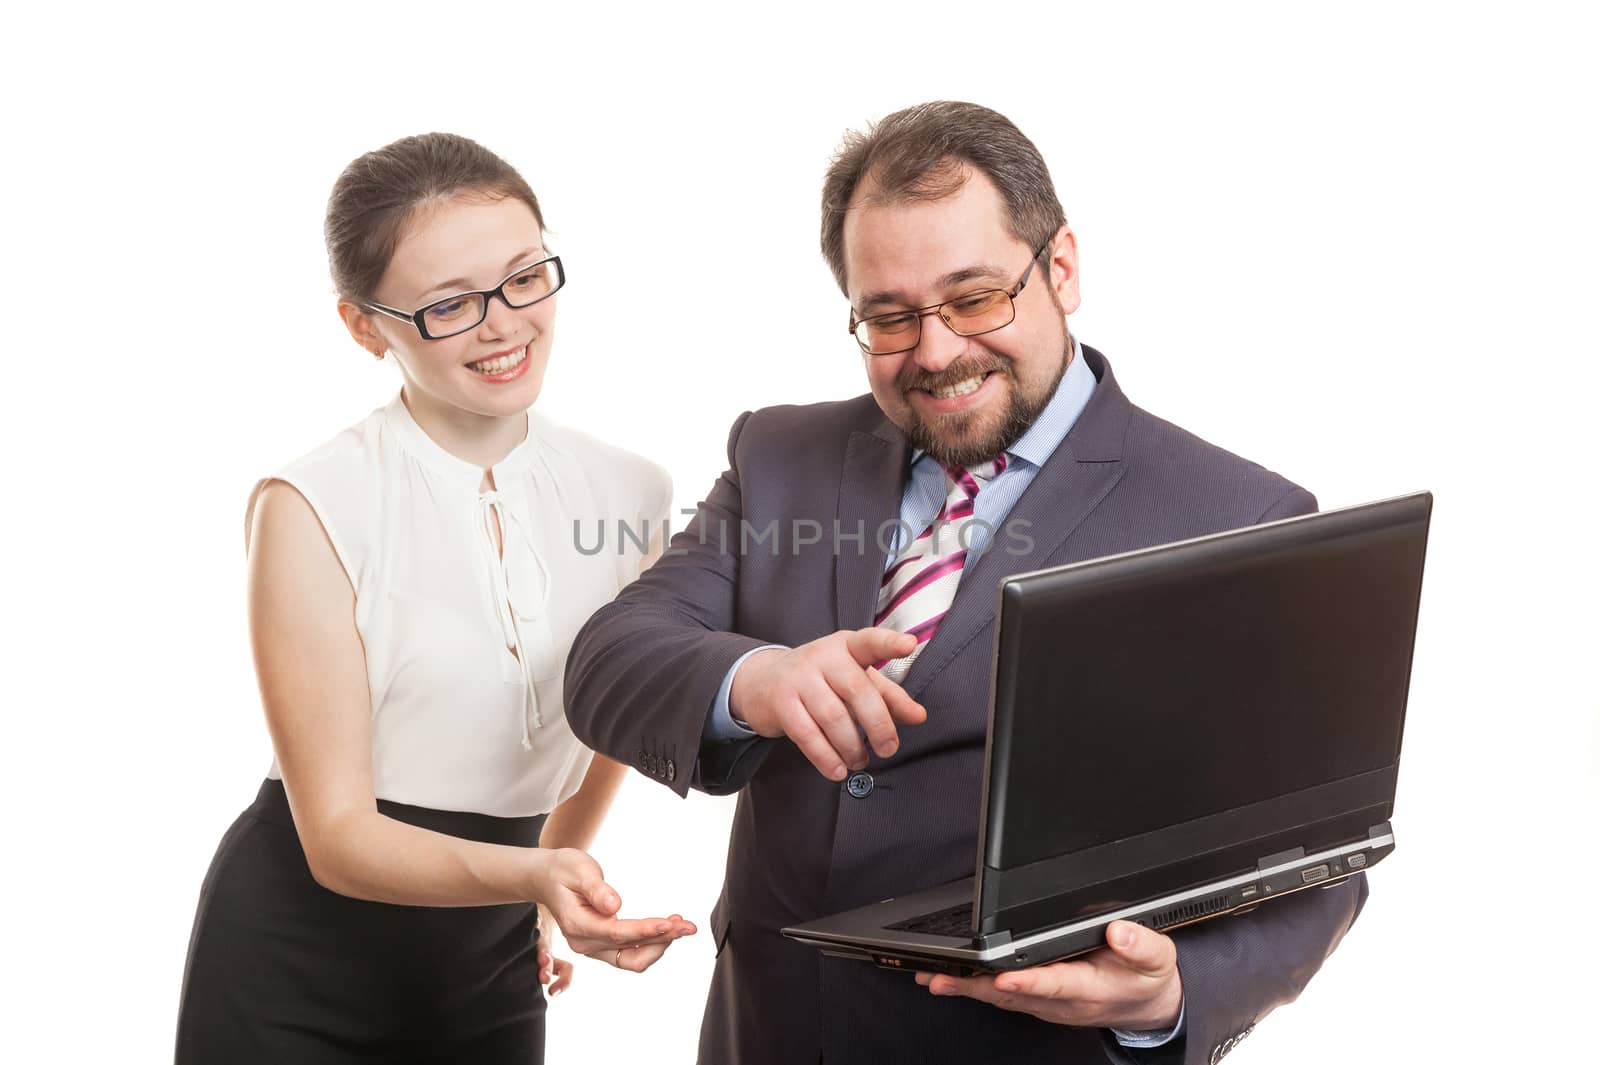 partners conduct negotiations standing and look at the laptop